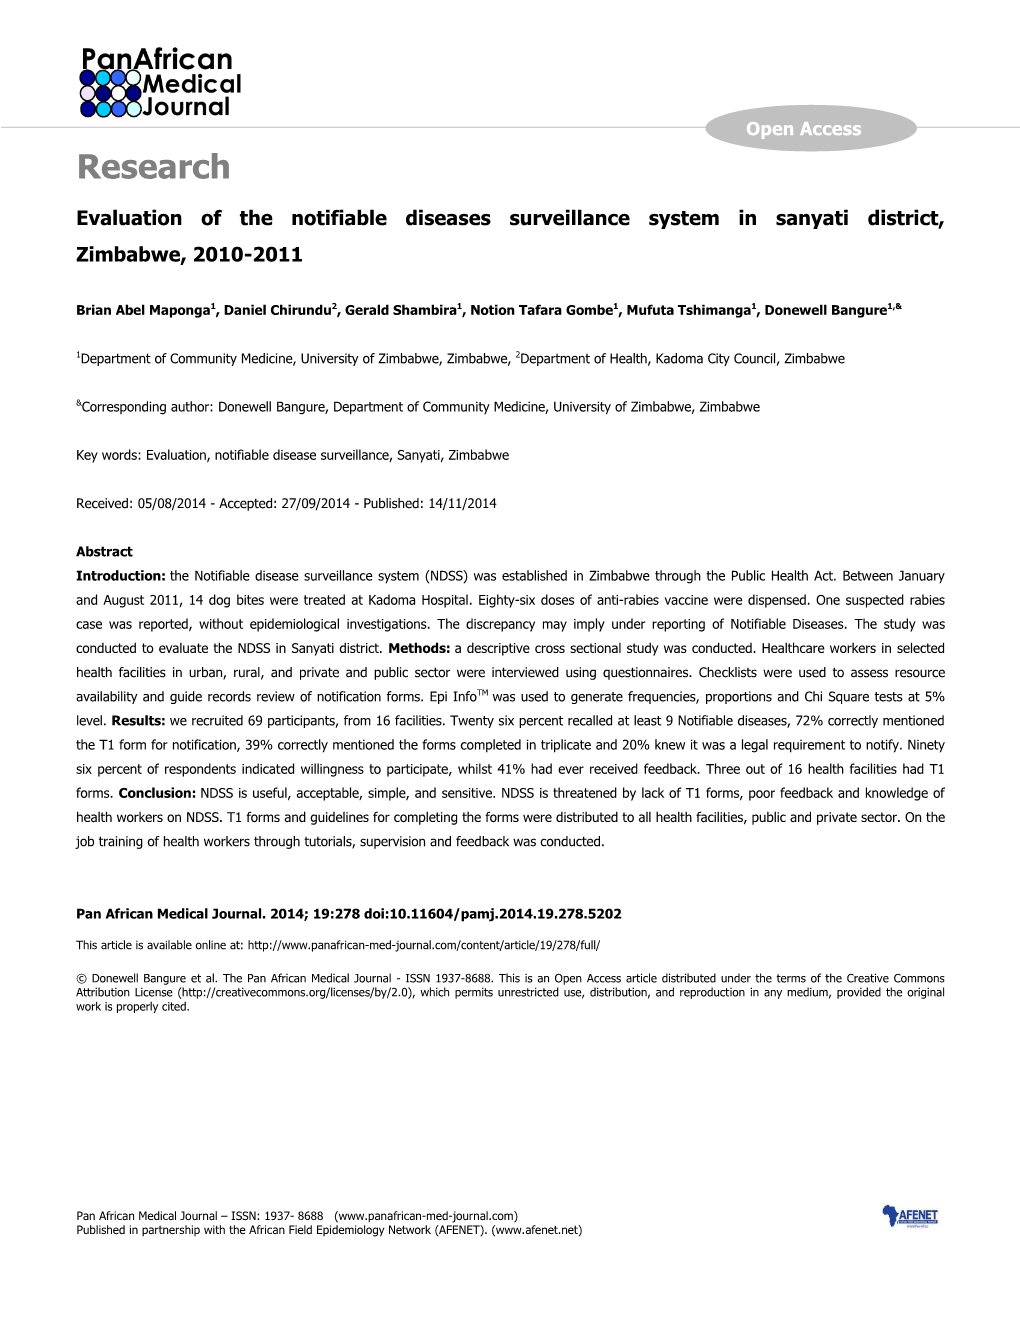 Research Evaluation of the Notifiable Diseases Surveillance System in Sanyati District, Zimbabwe, 2010-2011